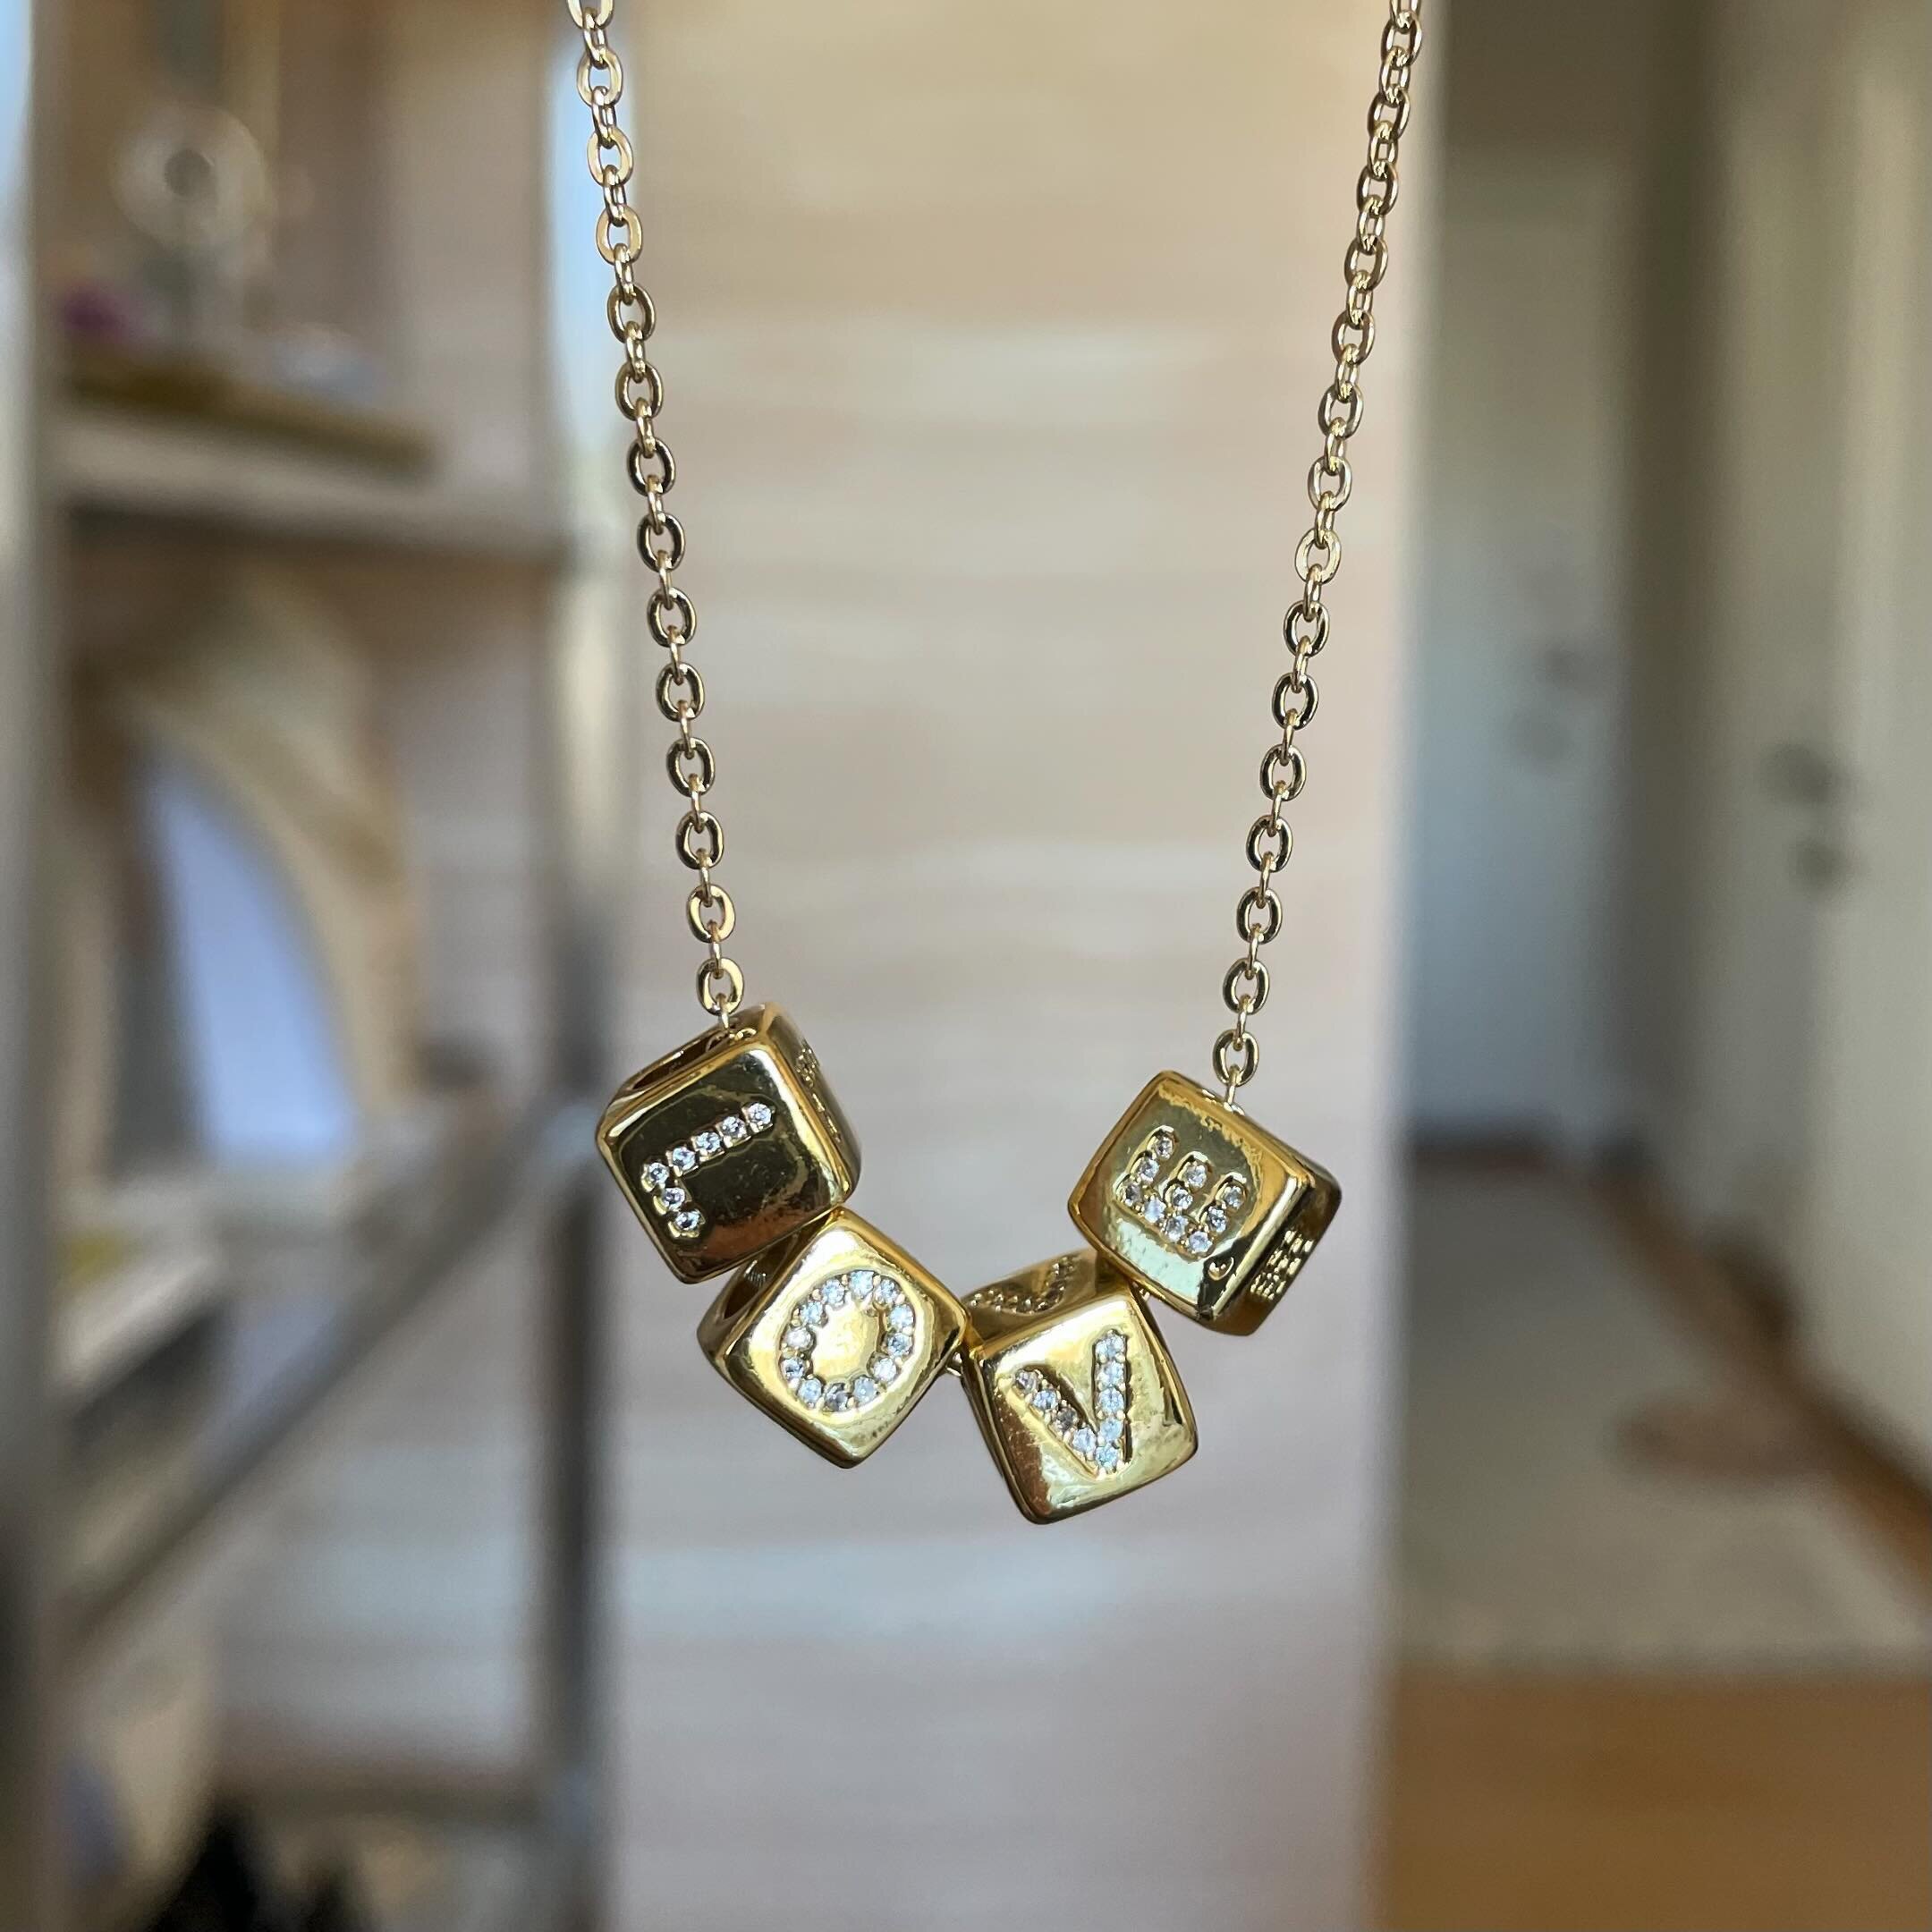 Always adding new pieces - great for gifts too - who doesn&rsquo;t love a gift? #love #lovenecklace #goldjewelry #jewelrydesigner #pavejewelry #sanfrancisco #localdesigner #layeringnecklaces #ootd #charms #jennifertutonjewelry